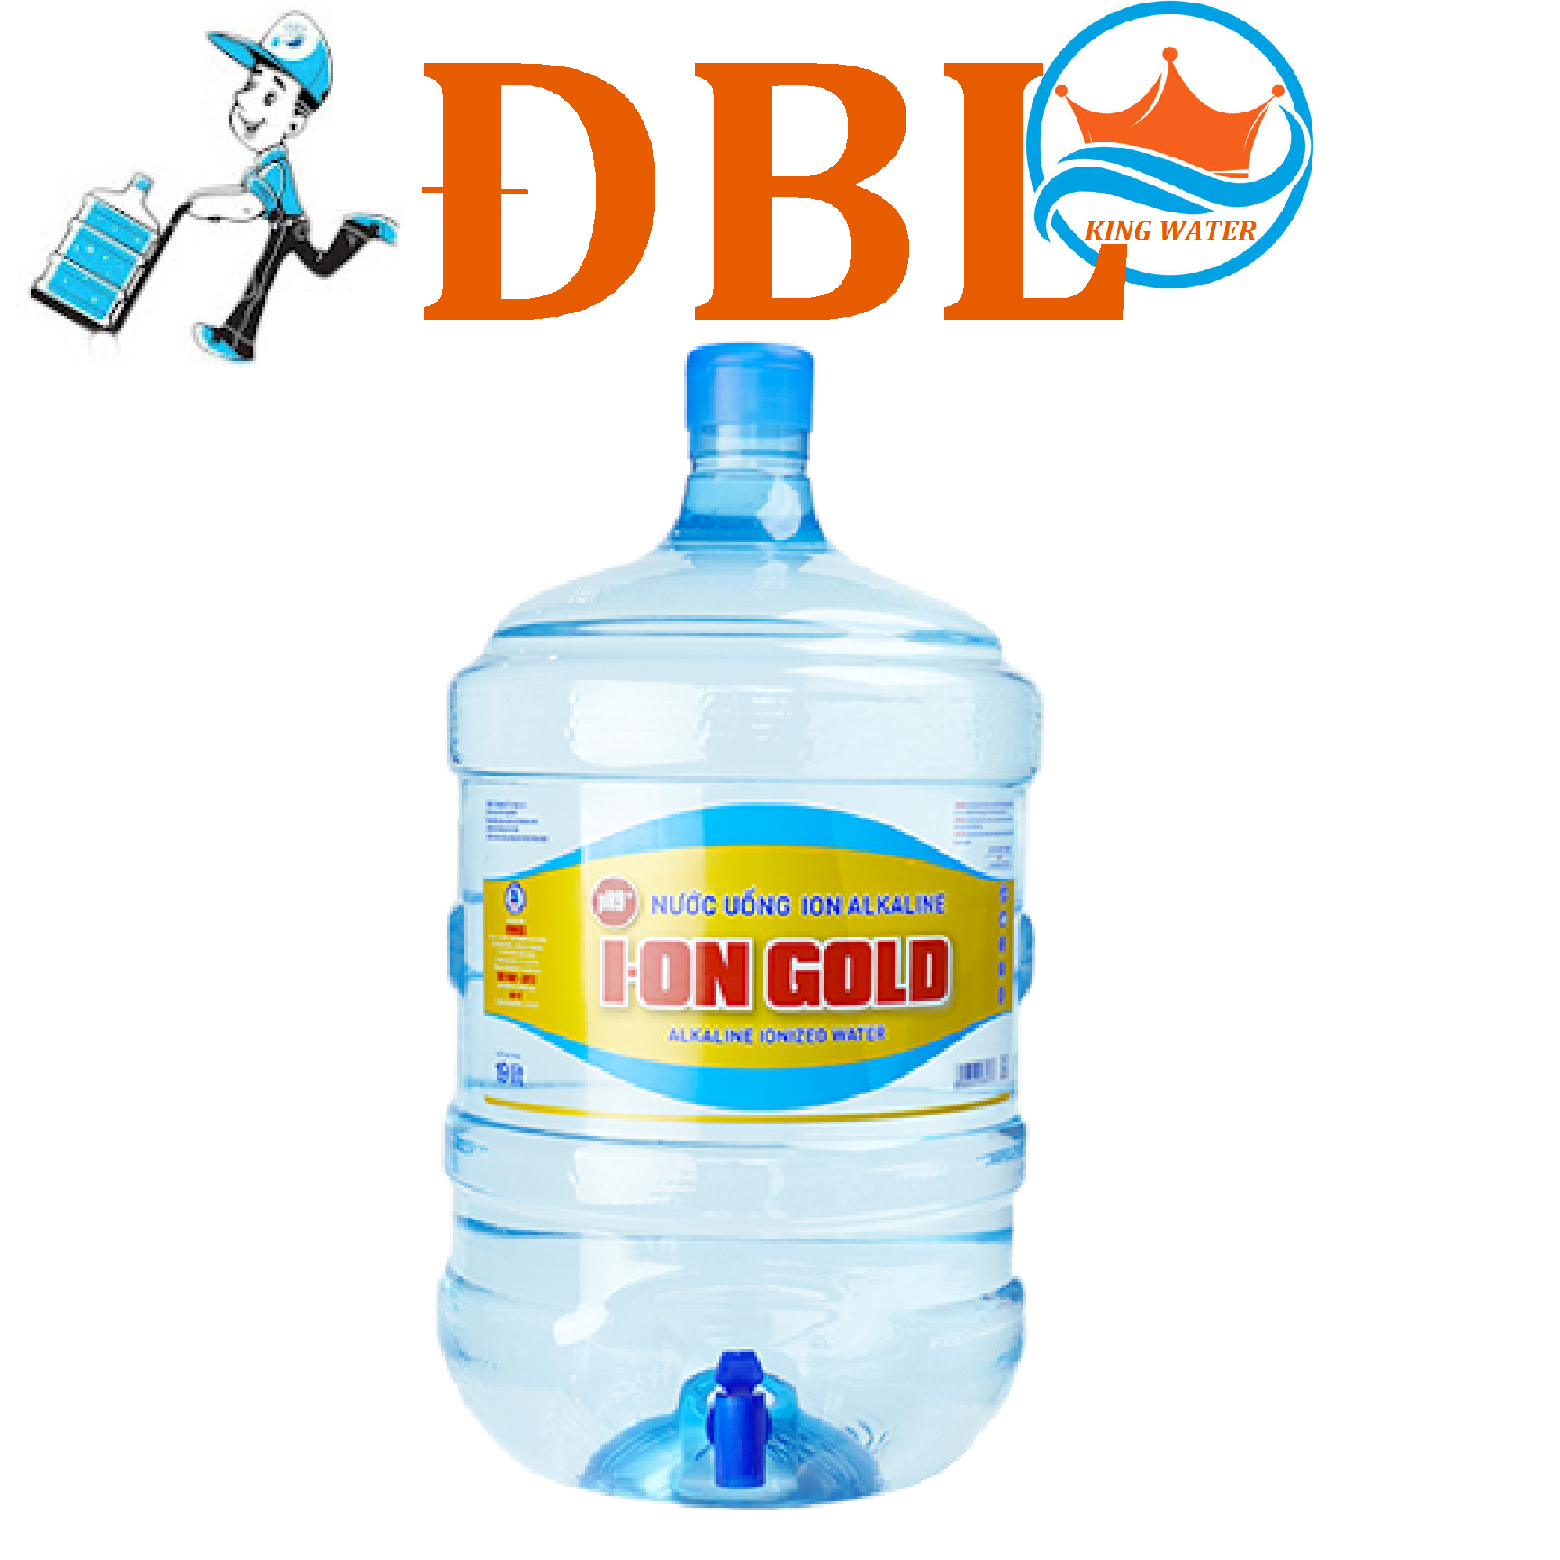 ion gold 19l